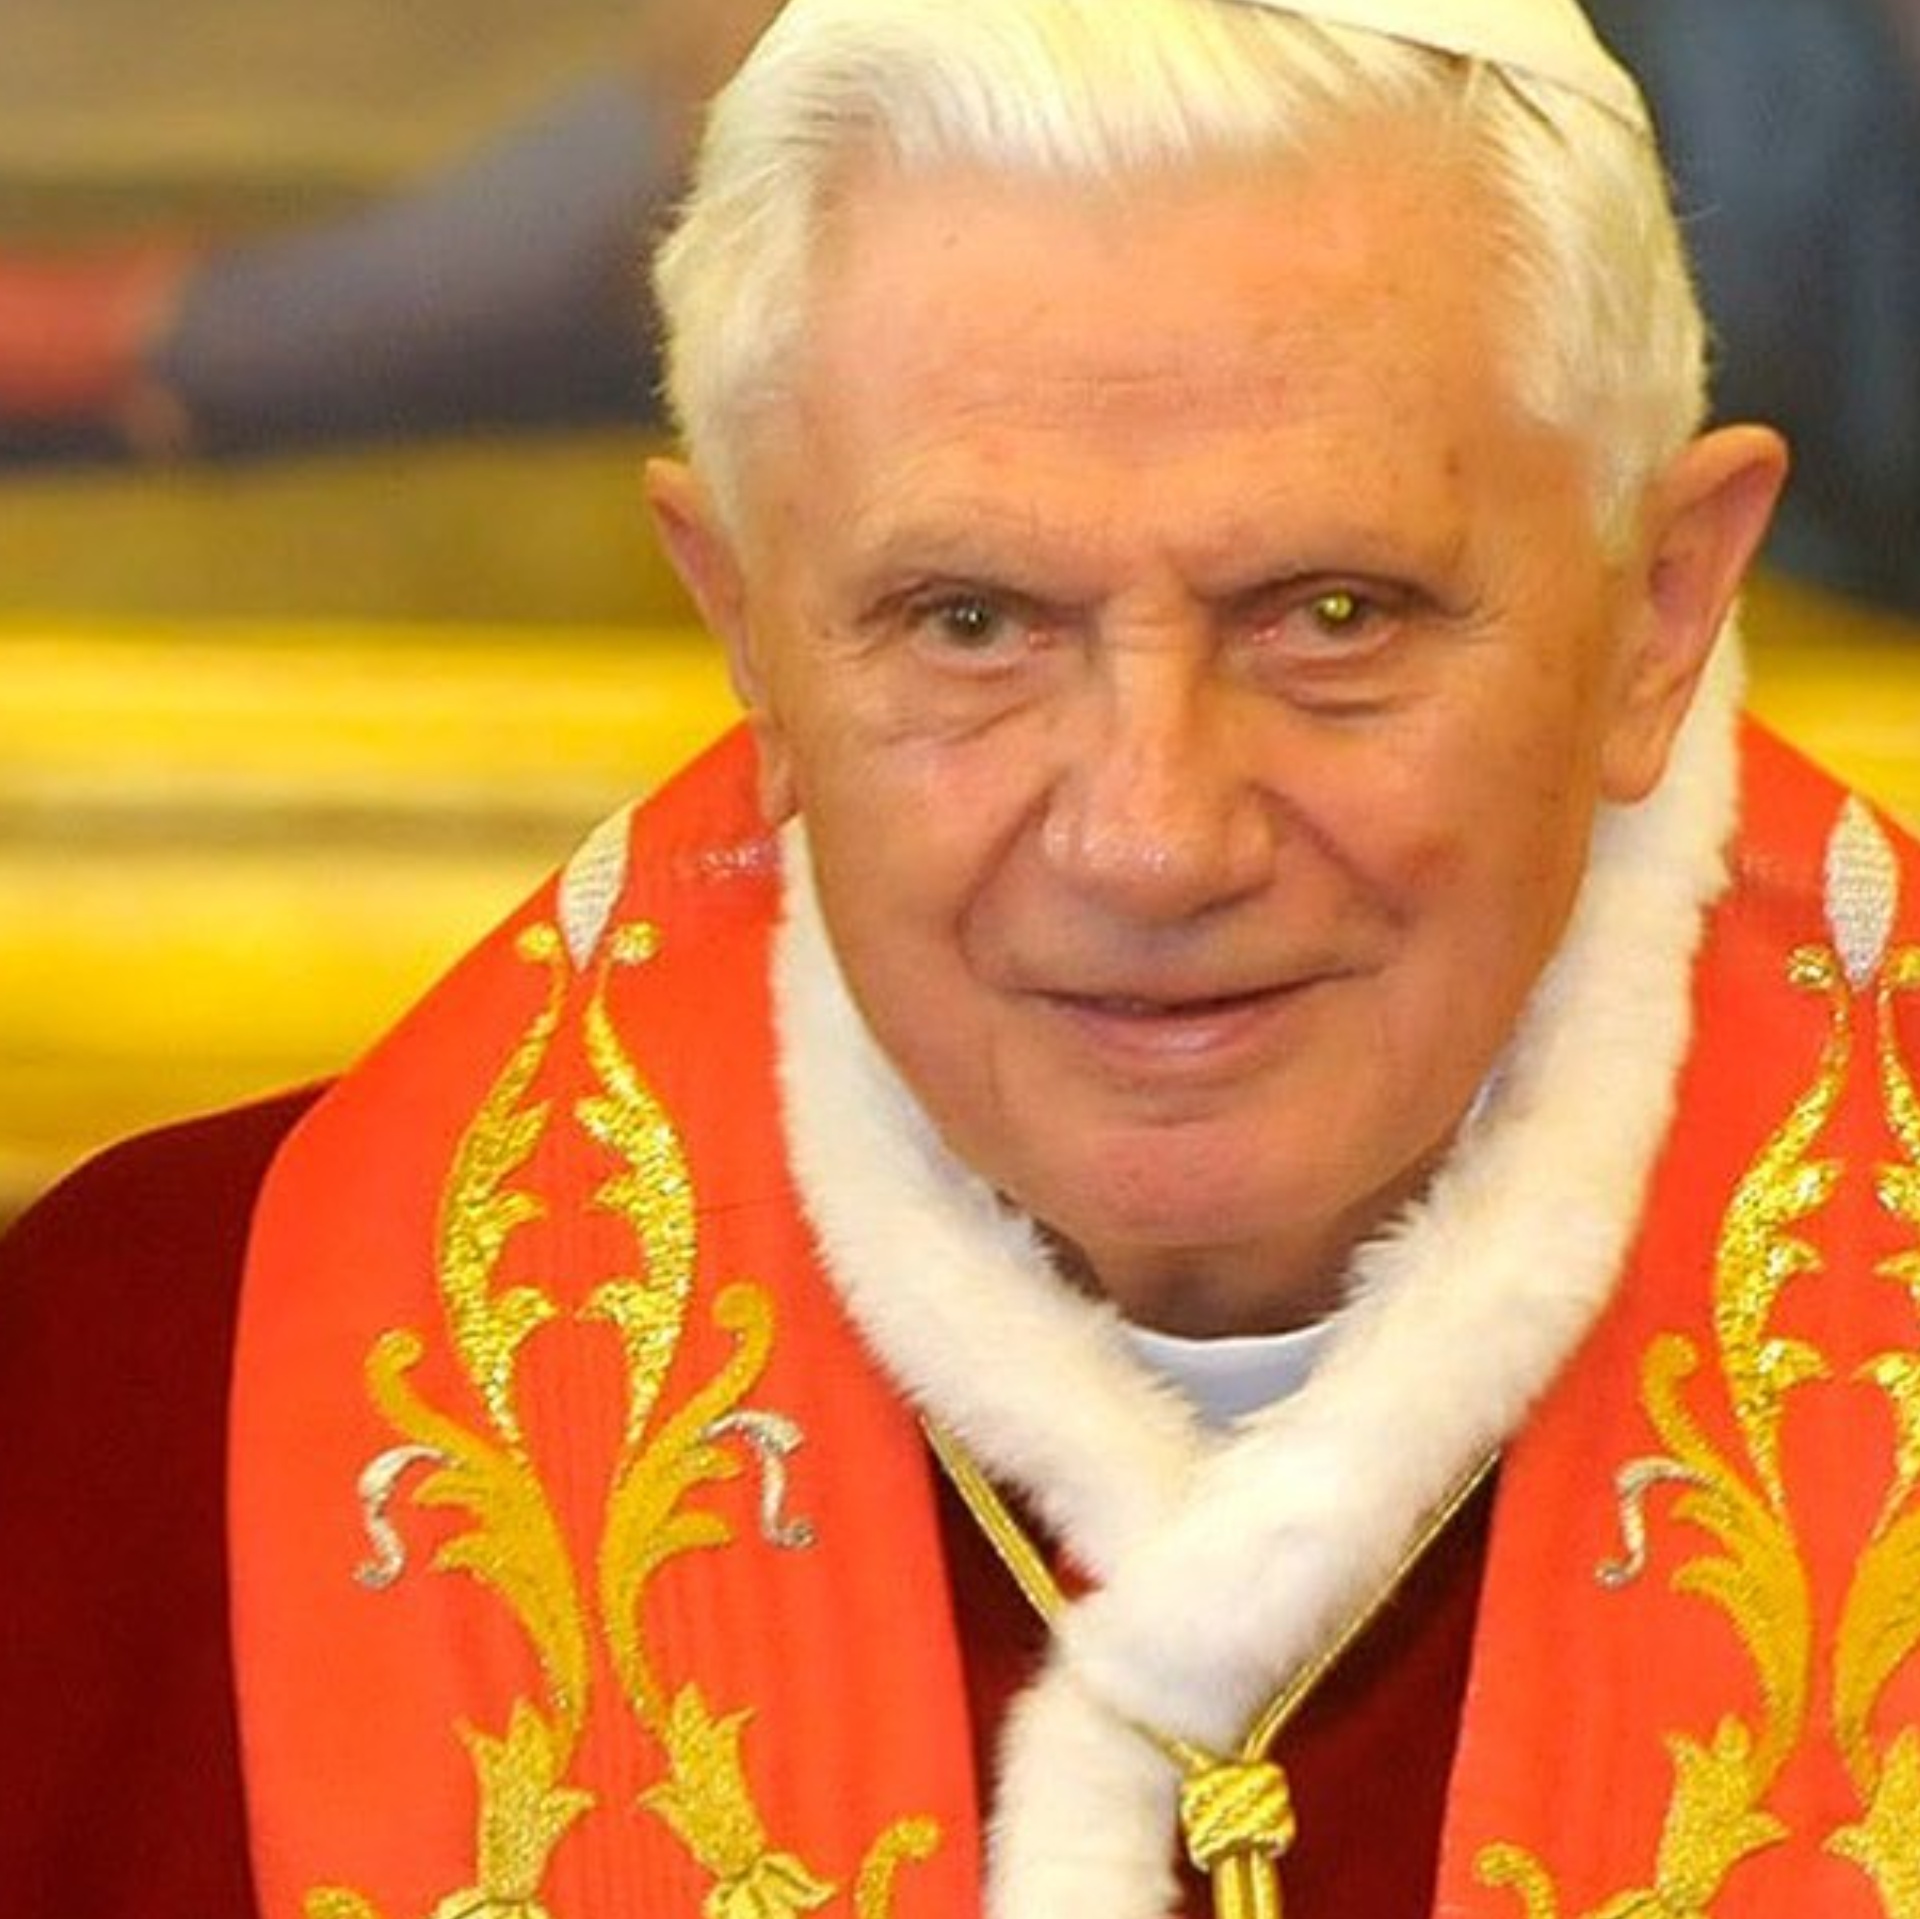 Tens of Thousands Pay Their Respects to Pope Benedict